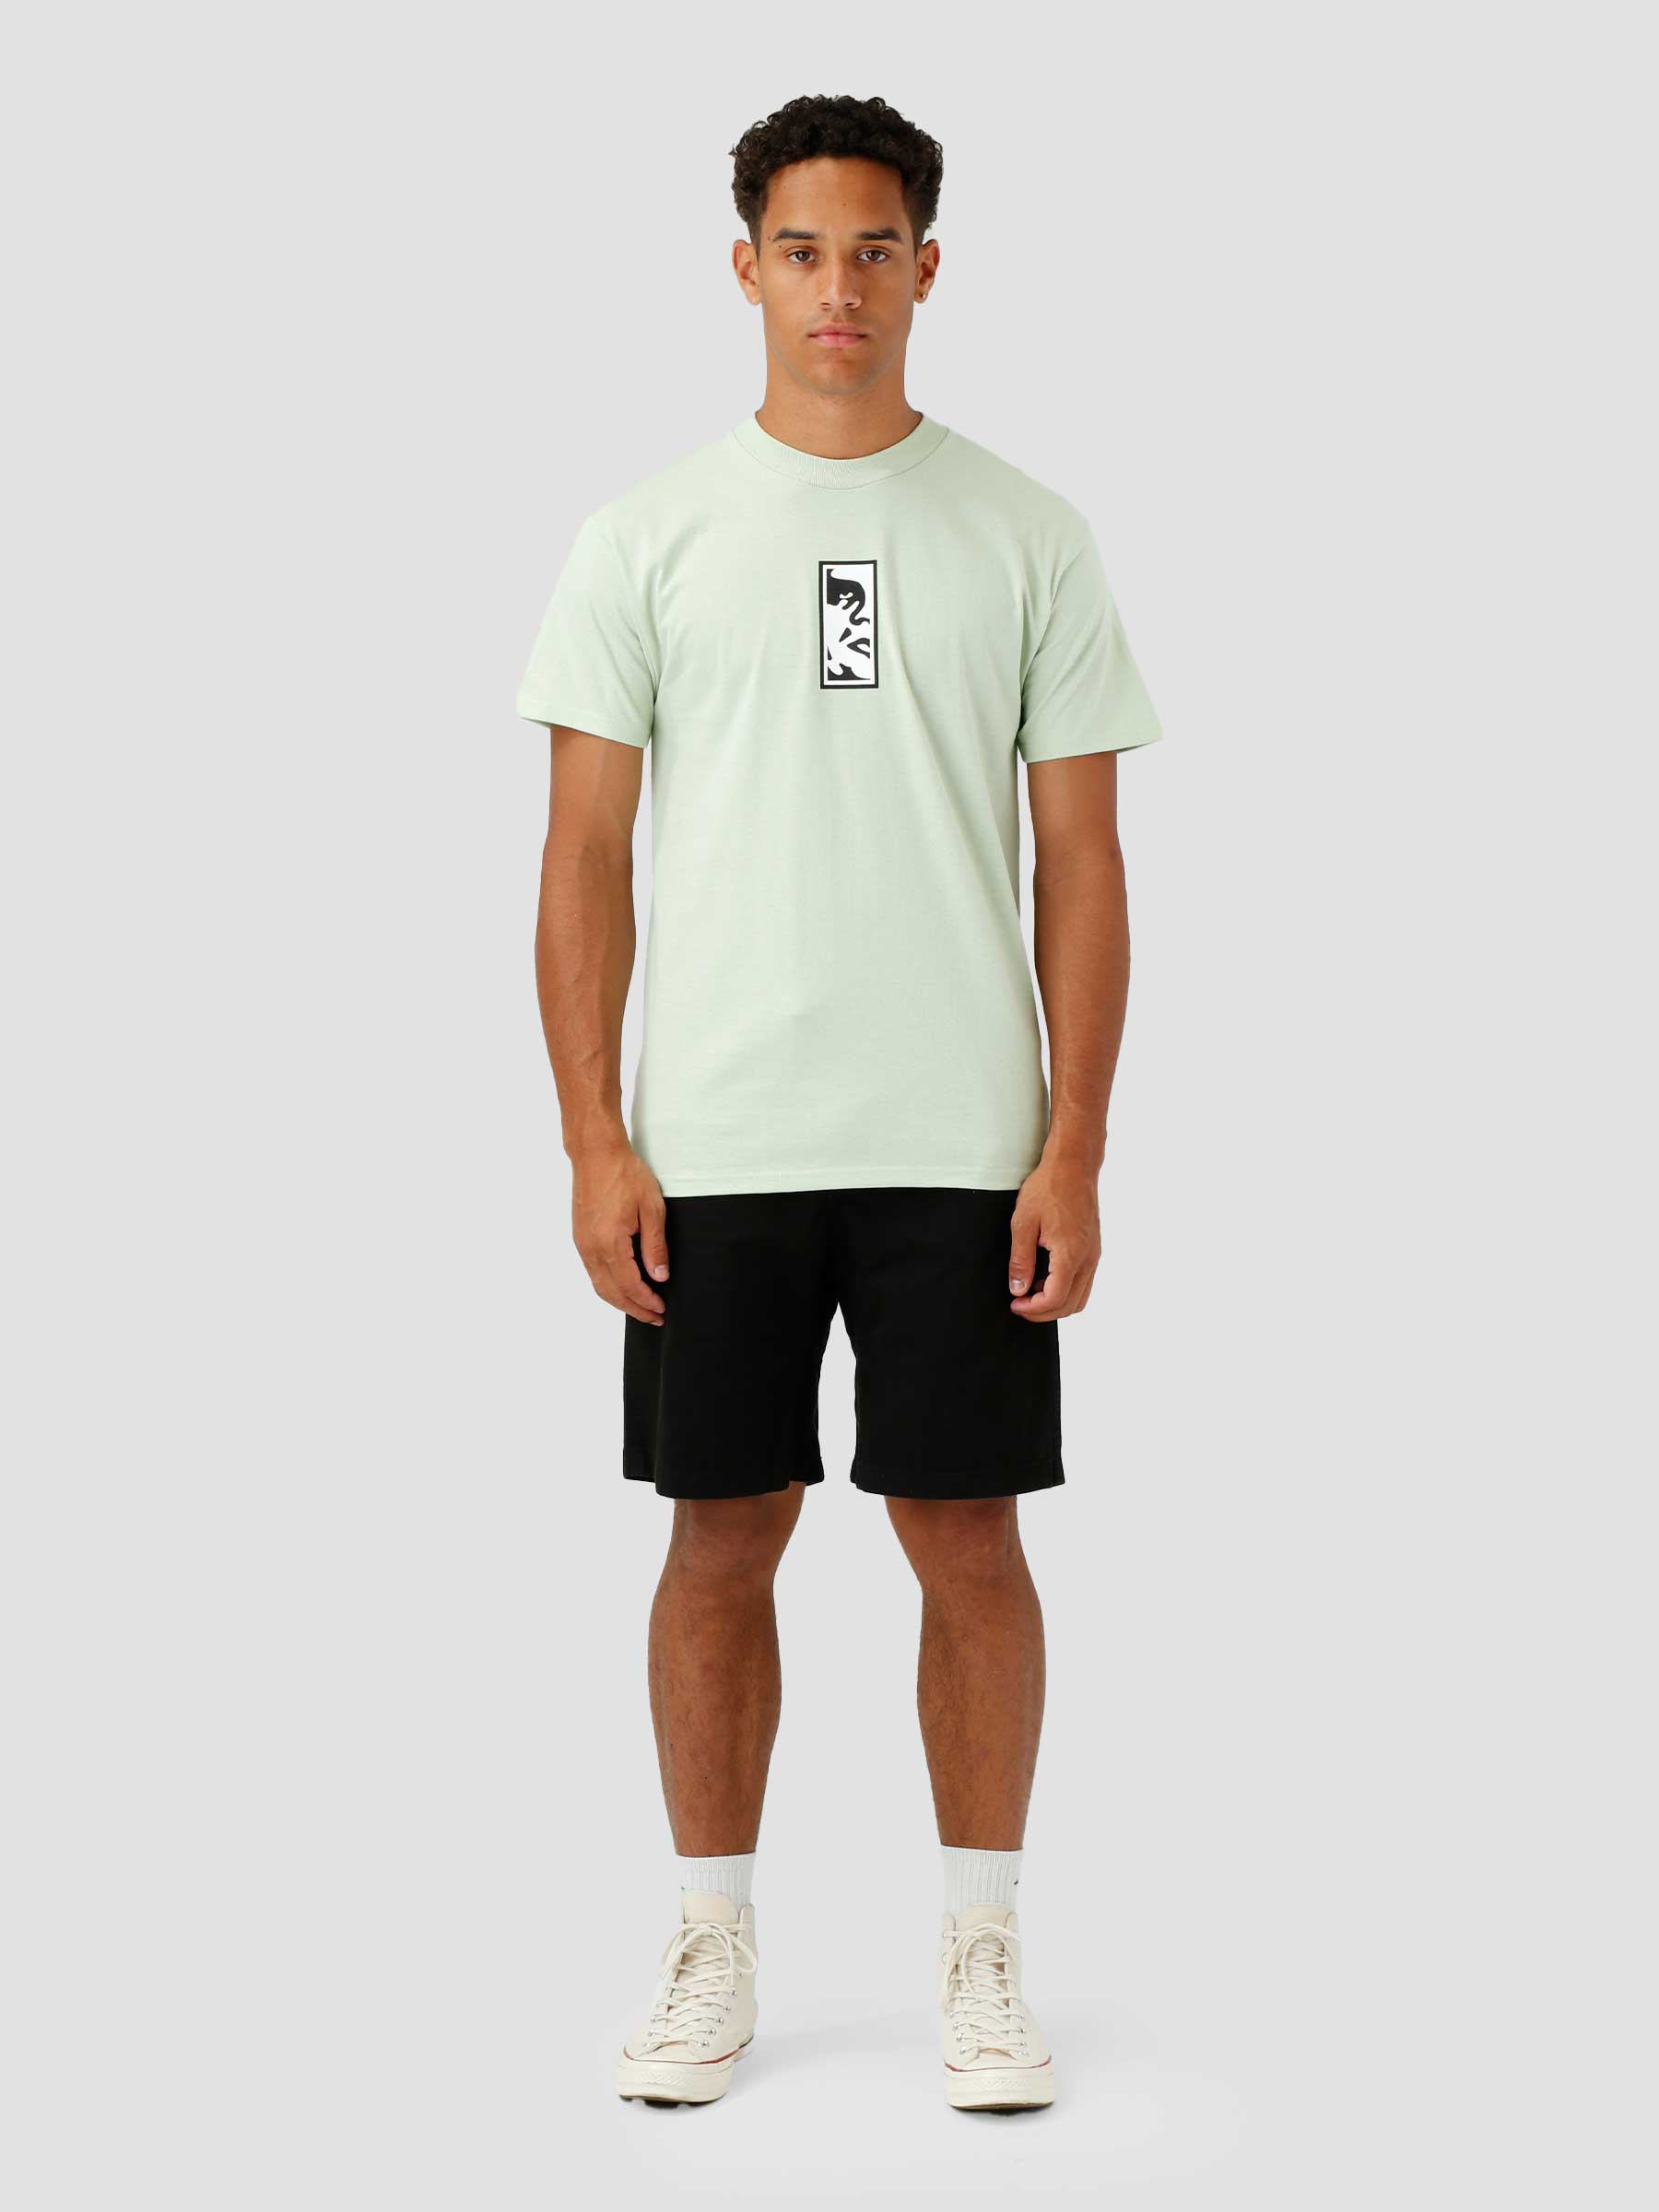 Obey Power & Equality T-shirt Cucumber 165263172